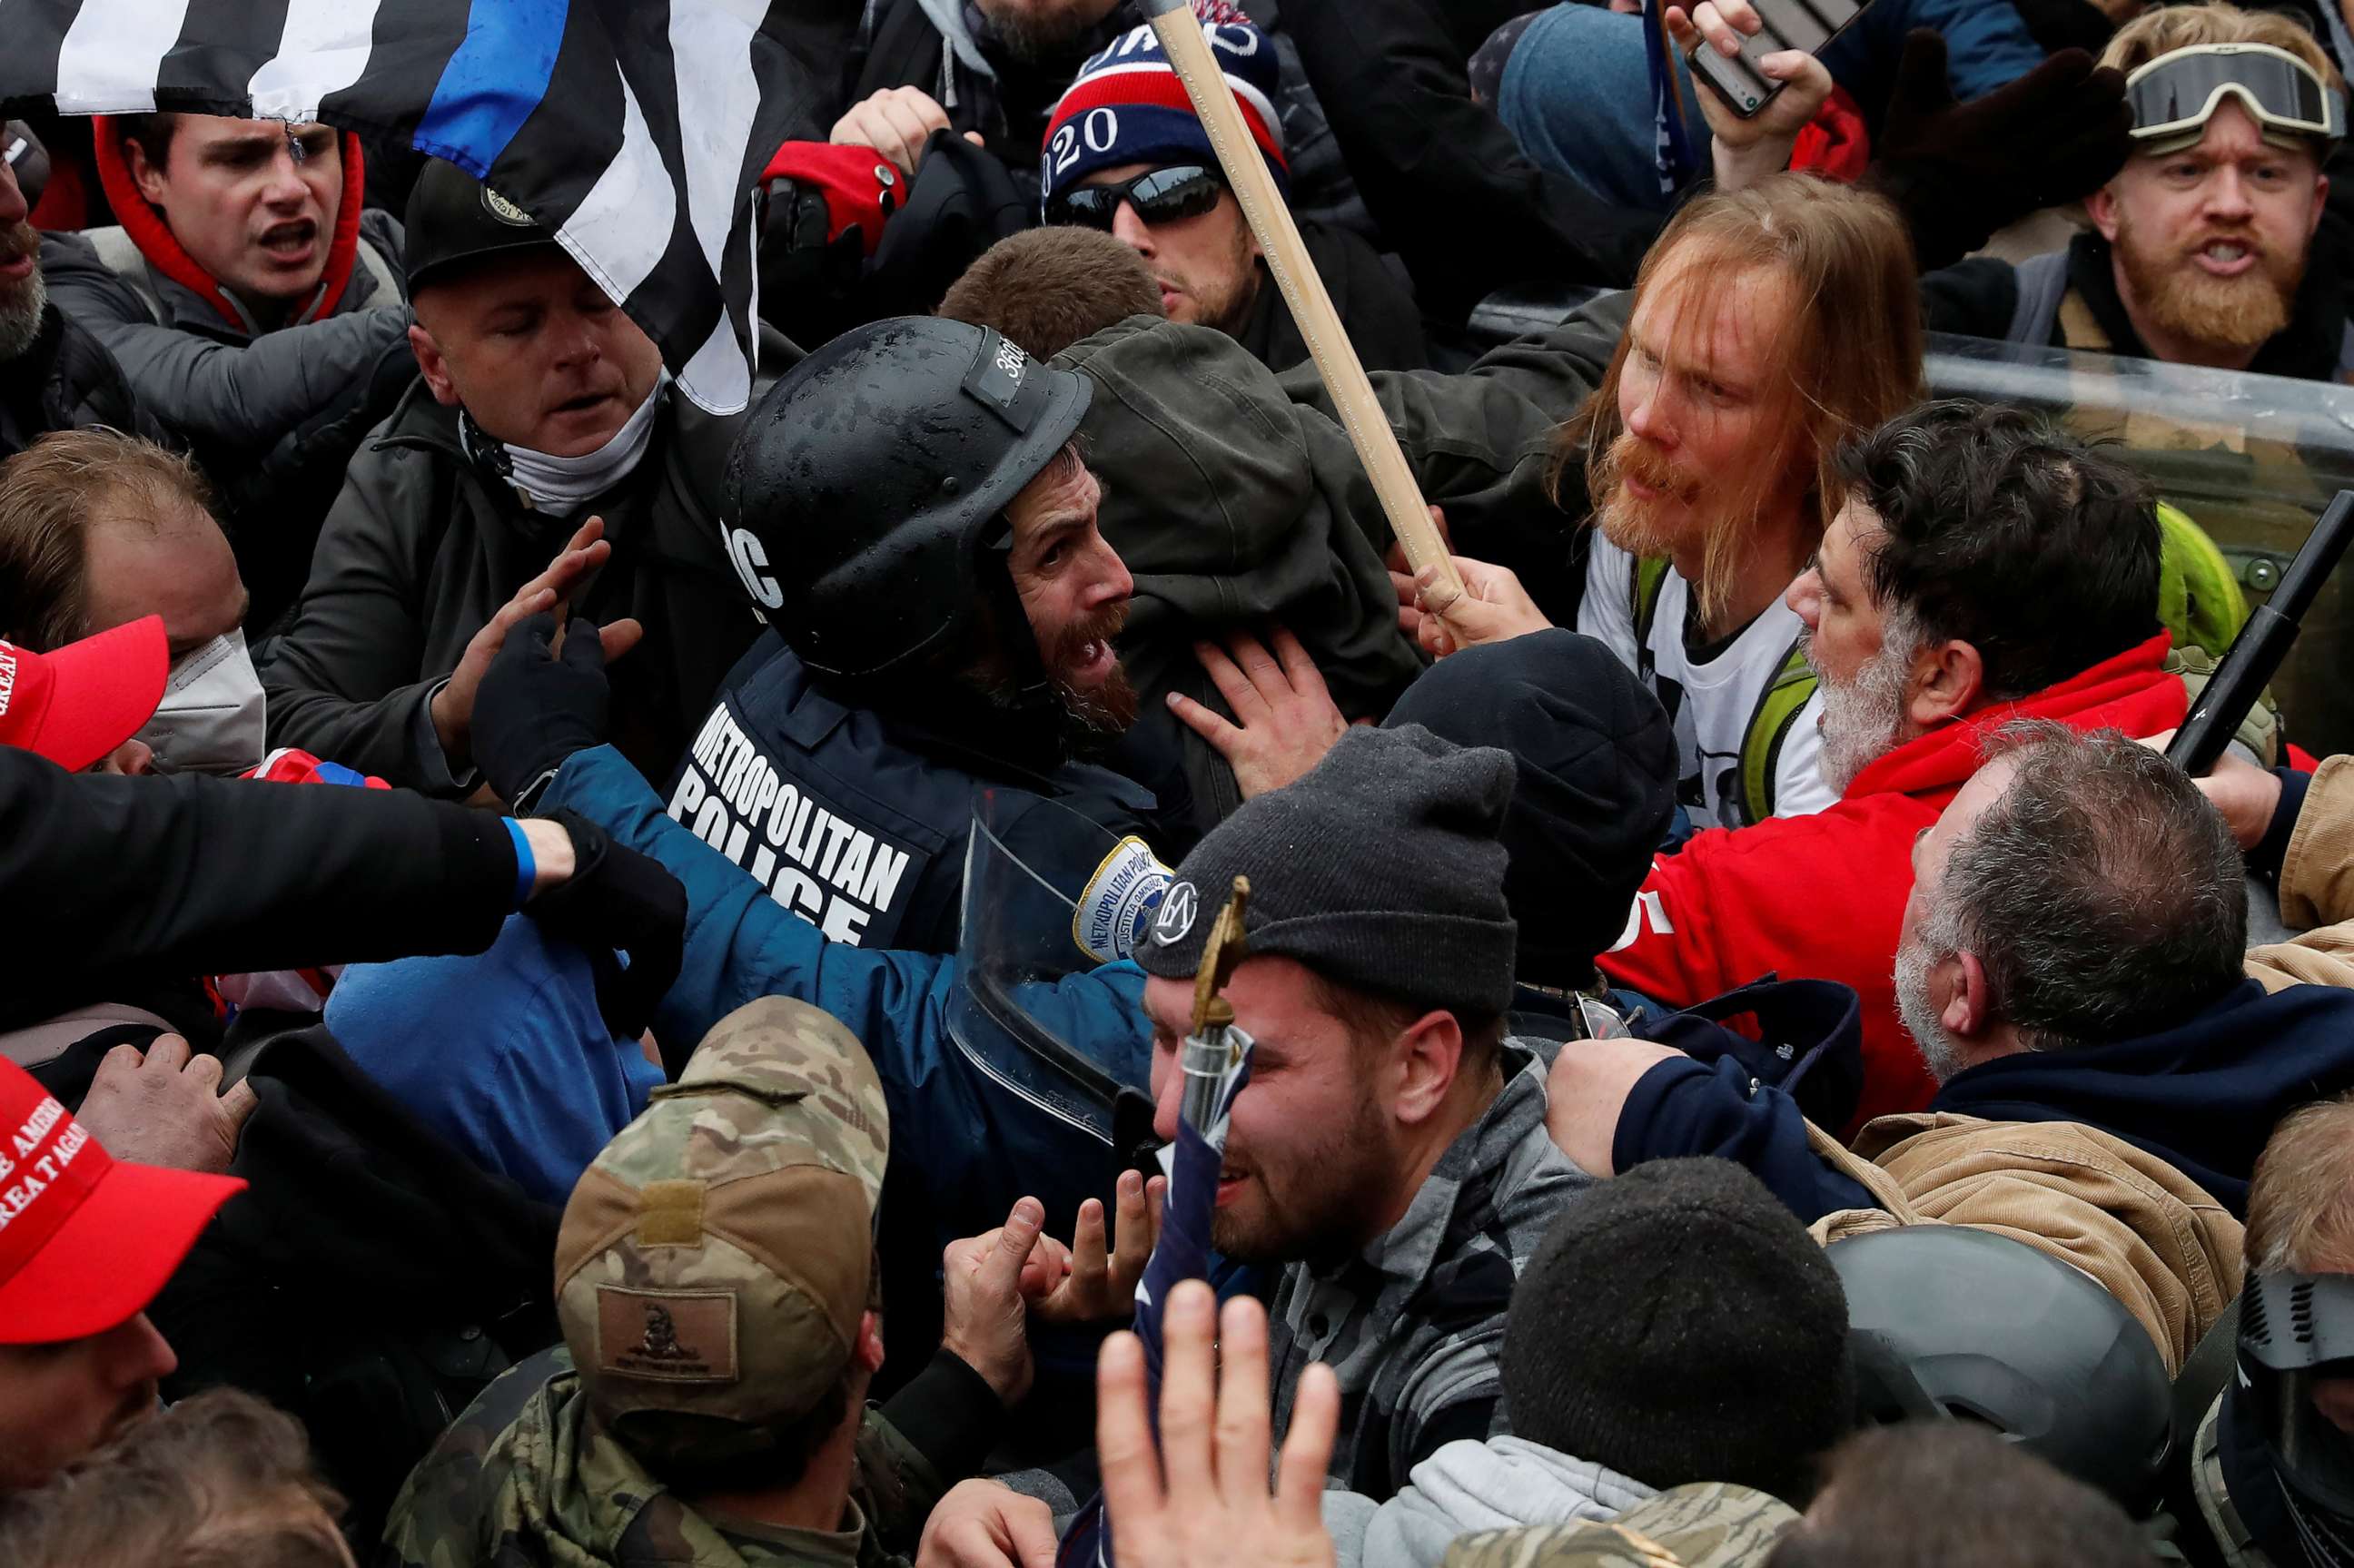 PHOTO: Pro-Trump protesters clash with D.C. police officer Michael Fanone during a rally to contest the certification of the 2020 presidential election results at the Capitol, Jan. 6, 2021.